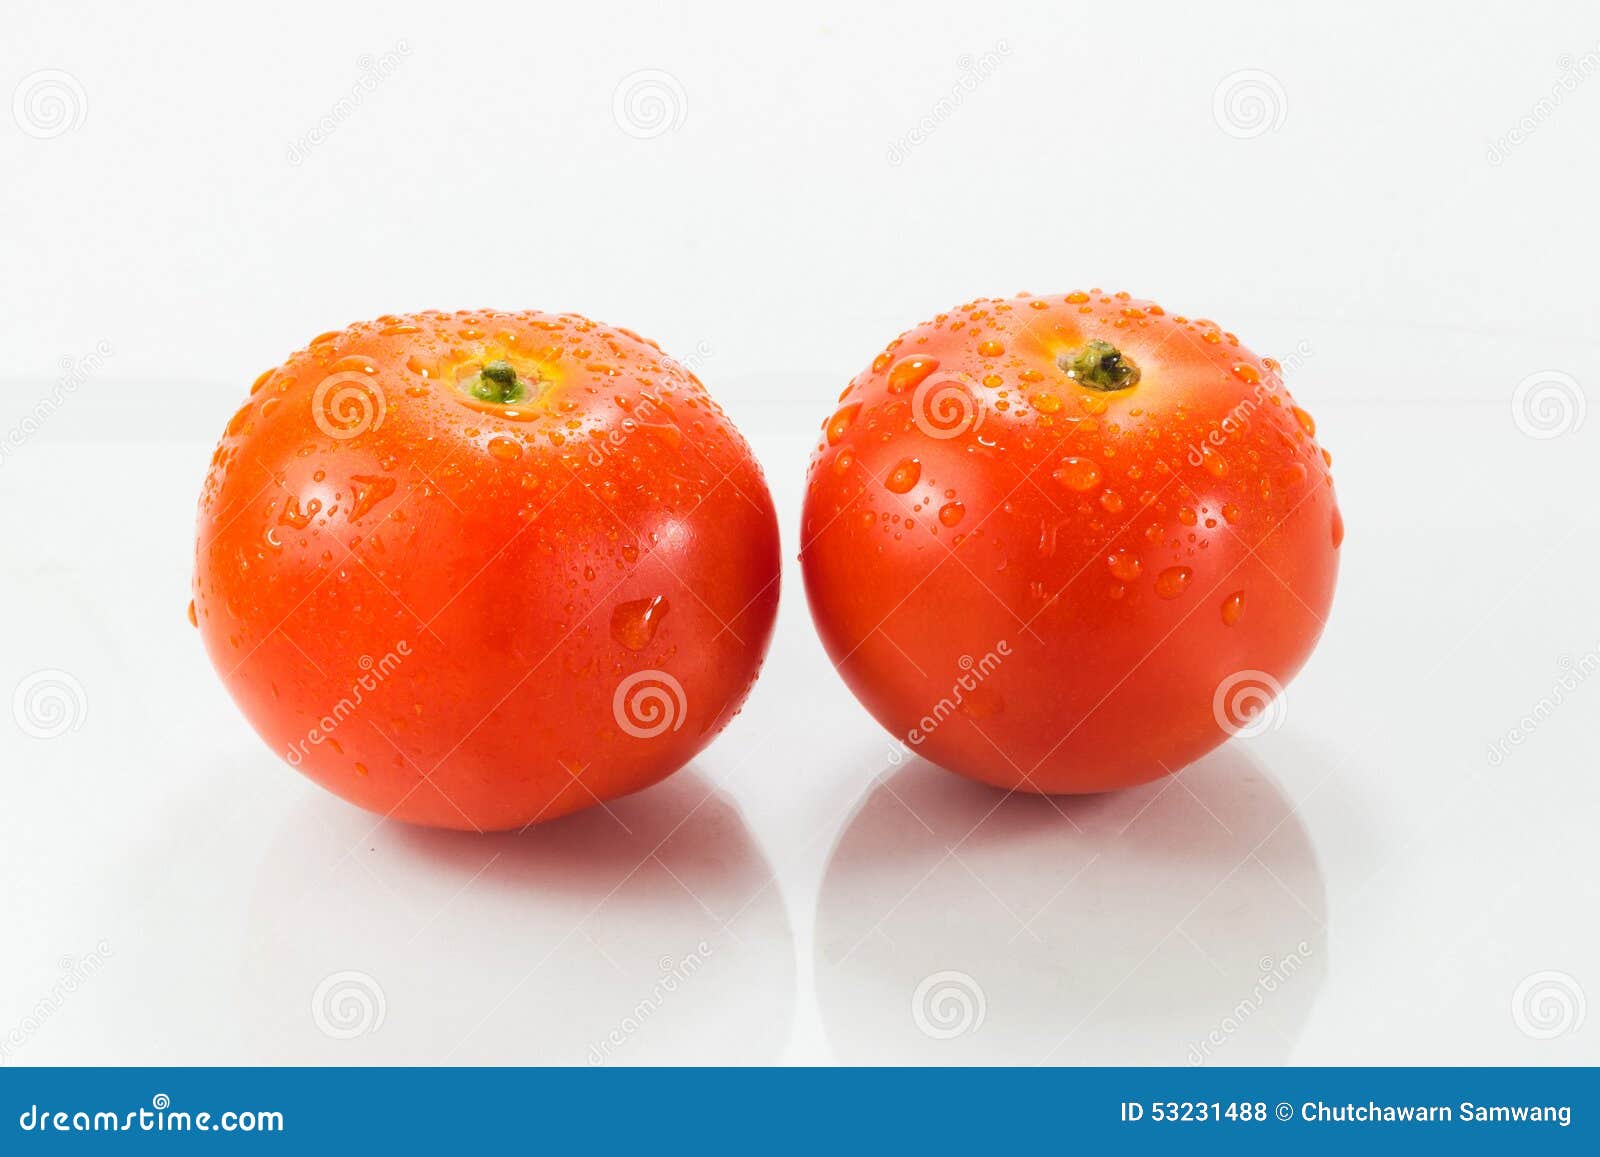 Two tomatoes isolated stock photo. Image of ingredient - 53231488